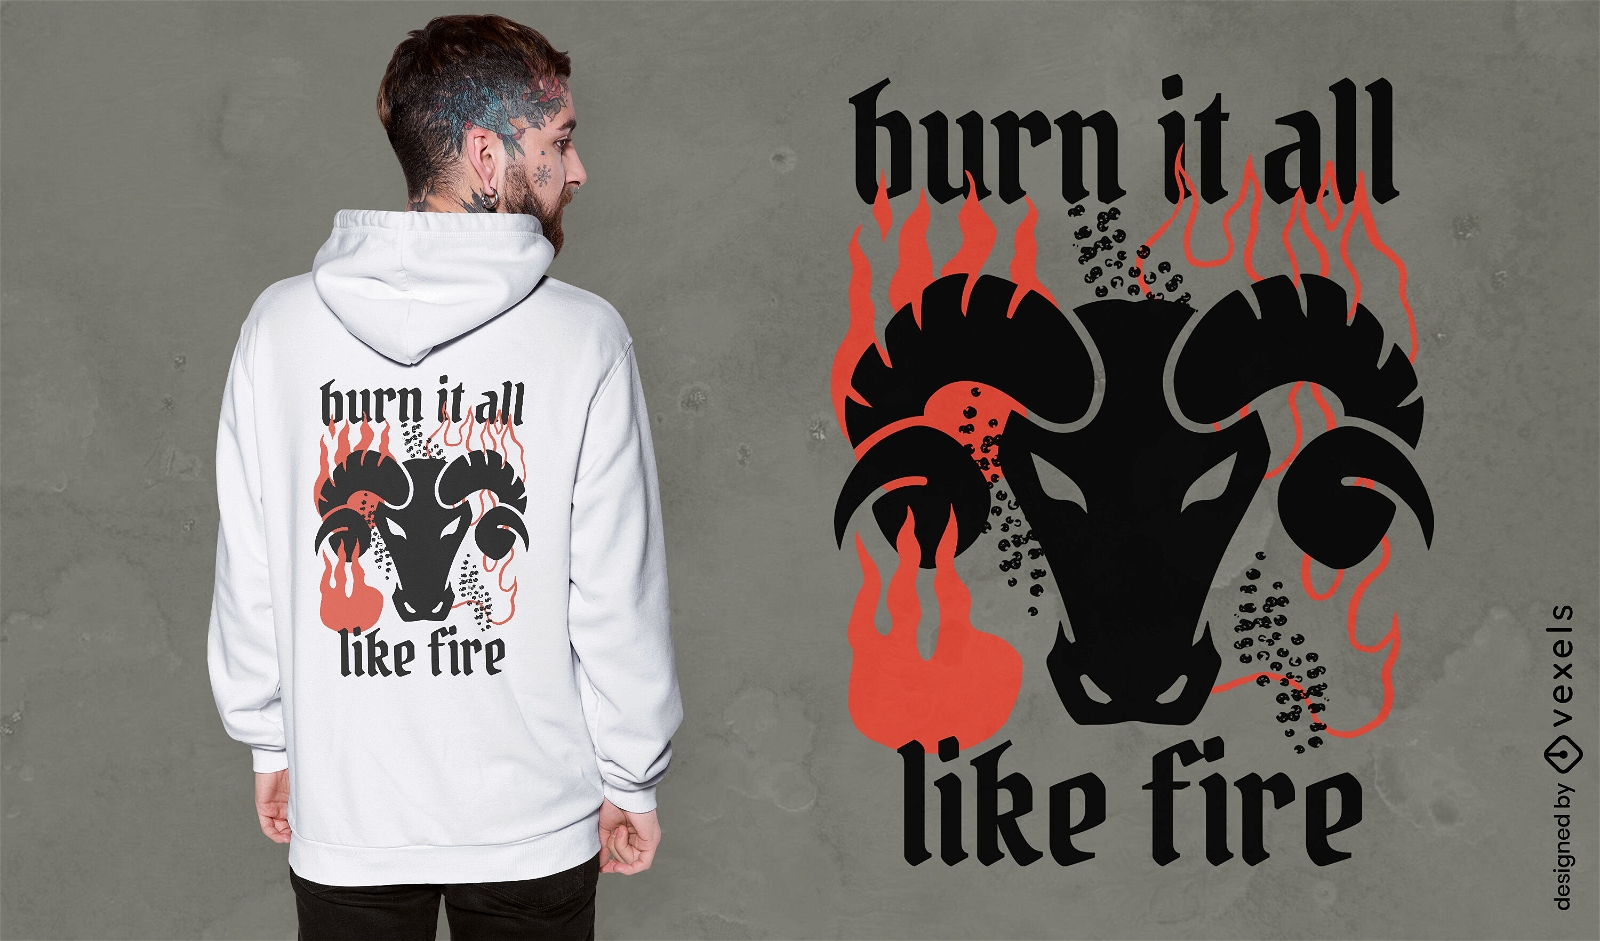 Aries fire quote t-shirt design